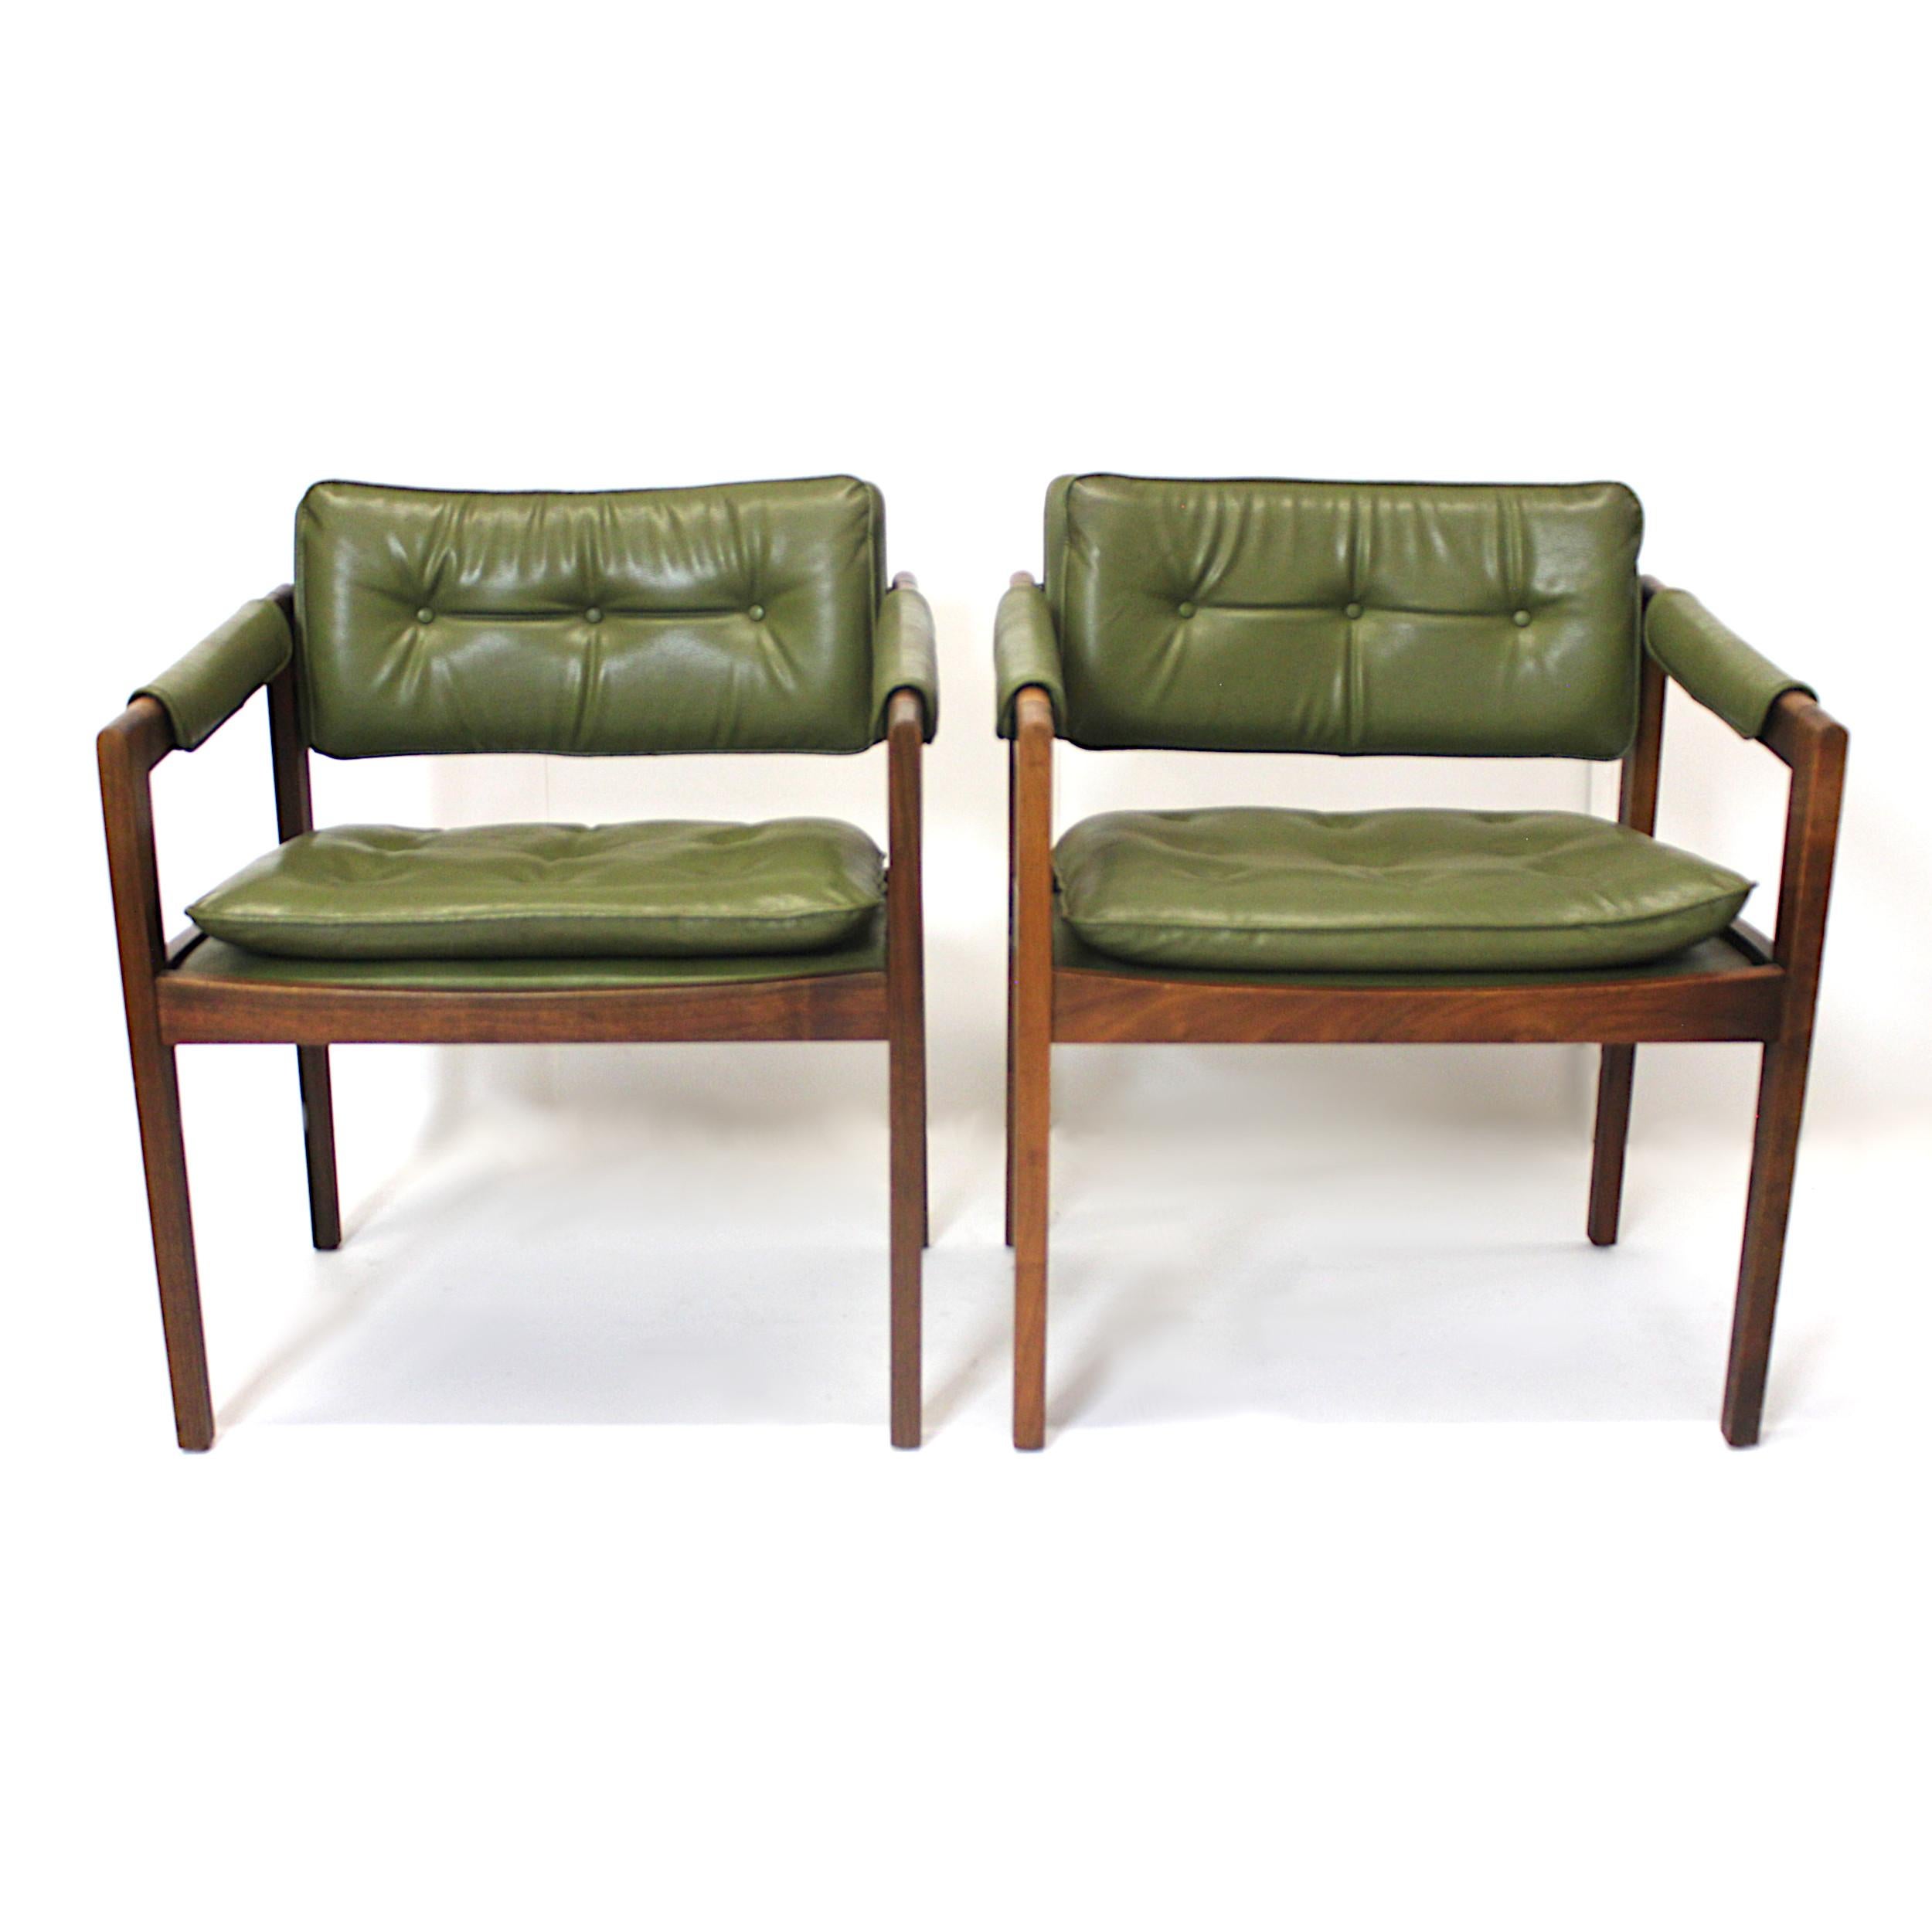 American Unusual Pair of Green Mid-Century Modern Lounge Chairs by Glenn of California